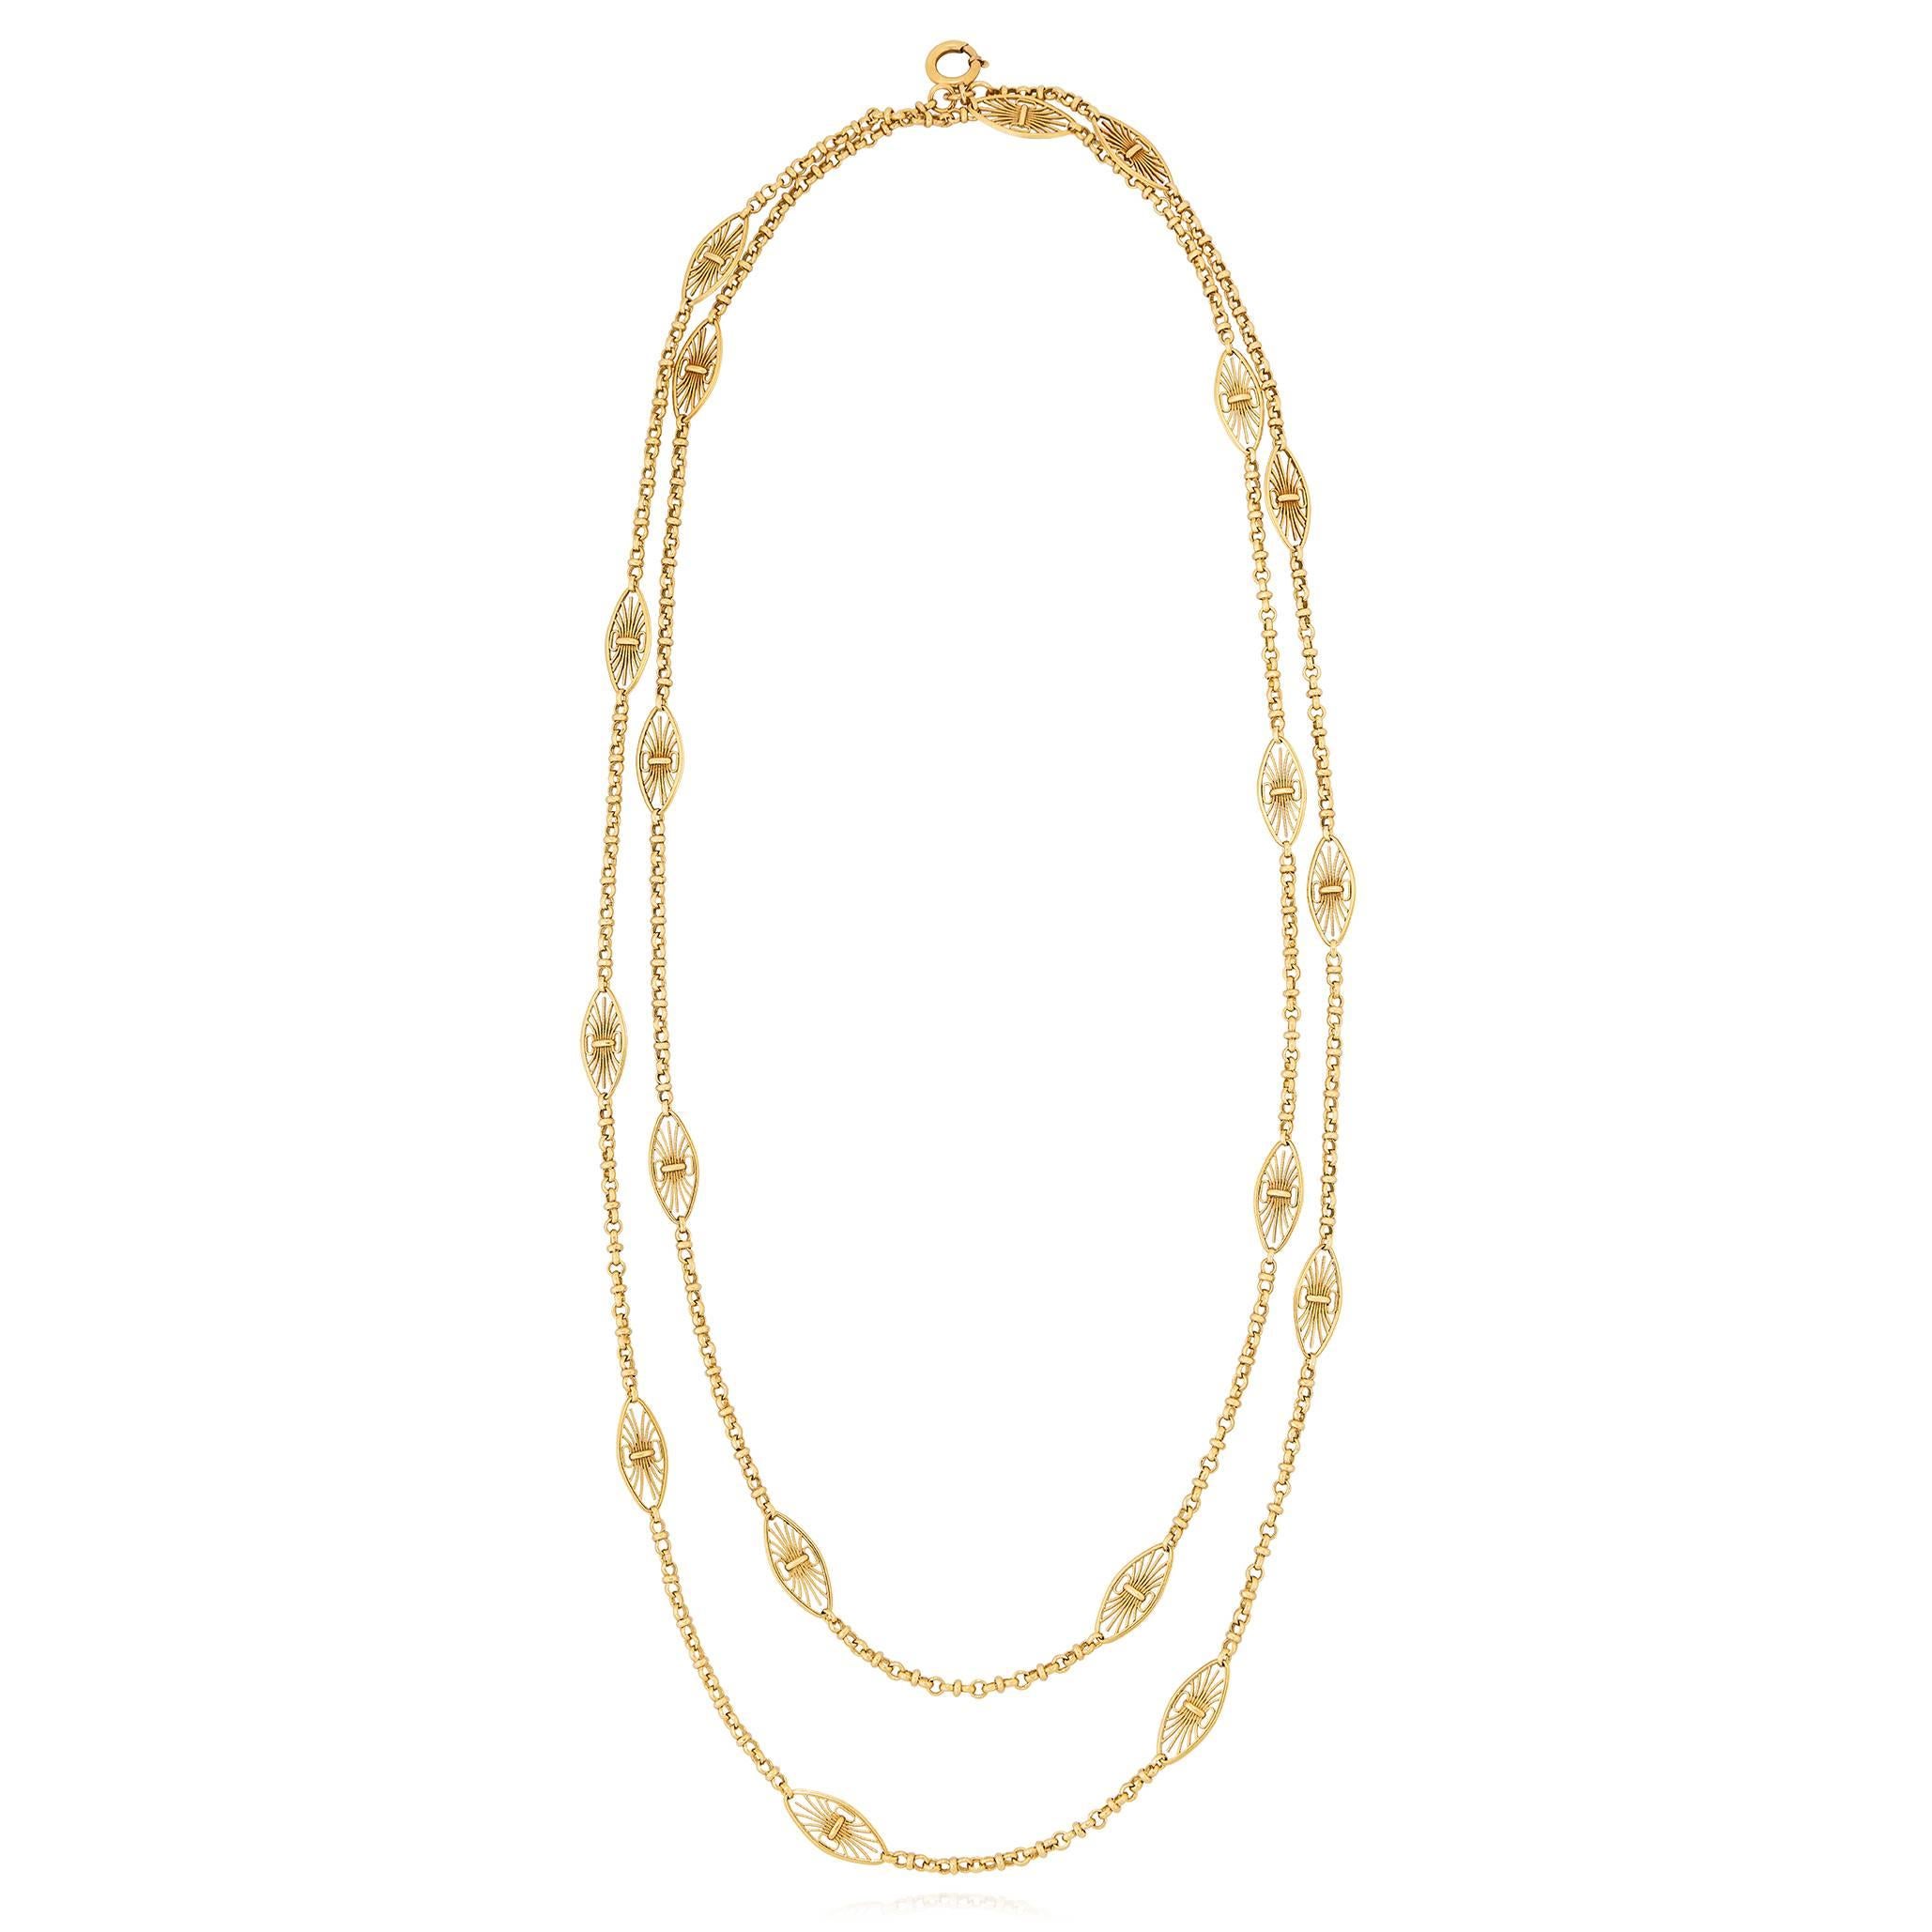 An antique French gold chain, composed of articulated marquise-shaped links with milgrain wirework. Stamped with French assay marks for 18K gold. Measuring 154cm approx. Circa 1900.